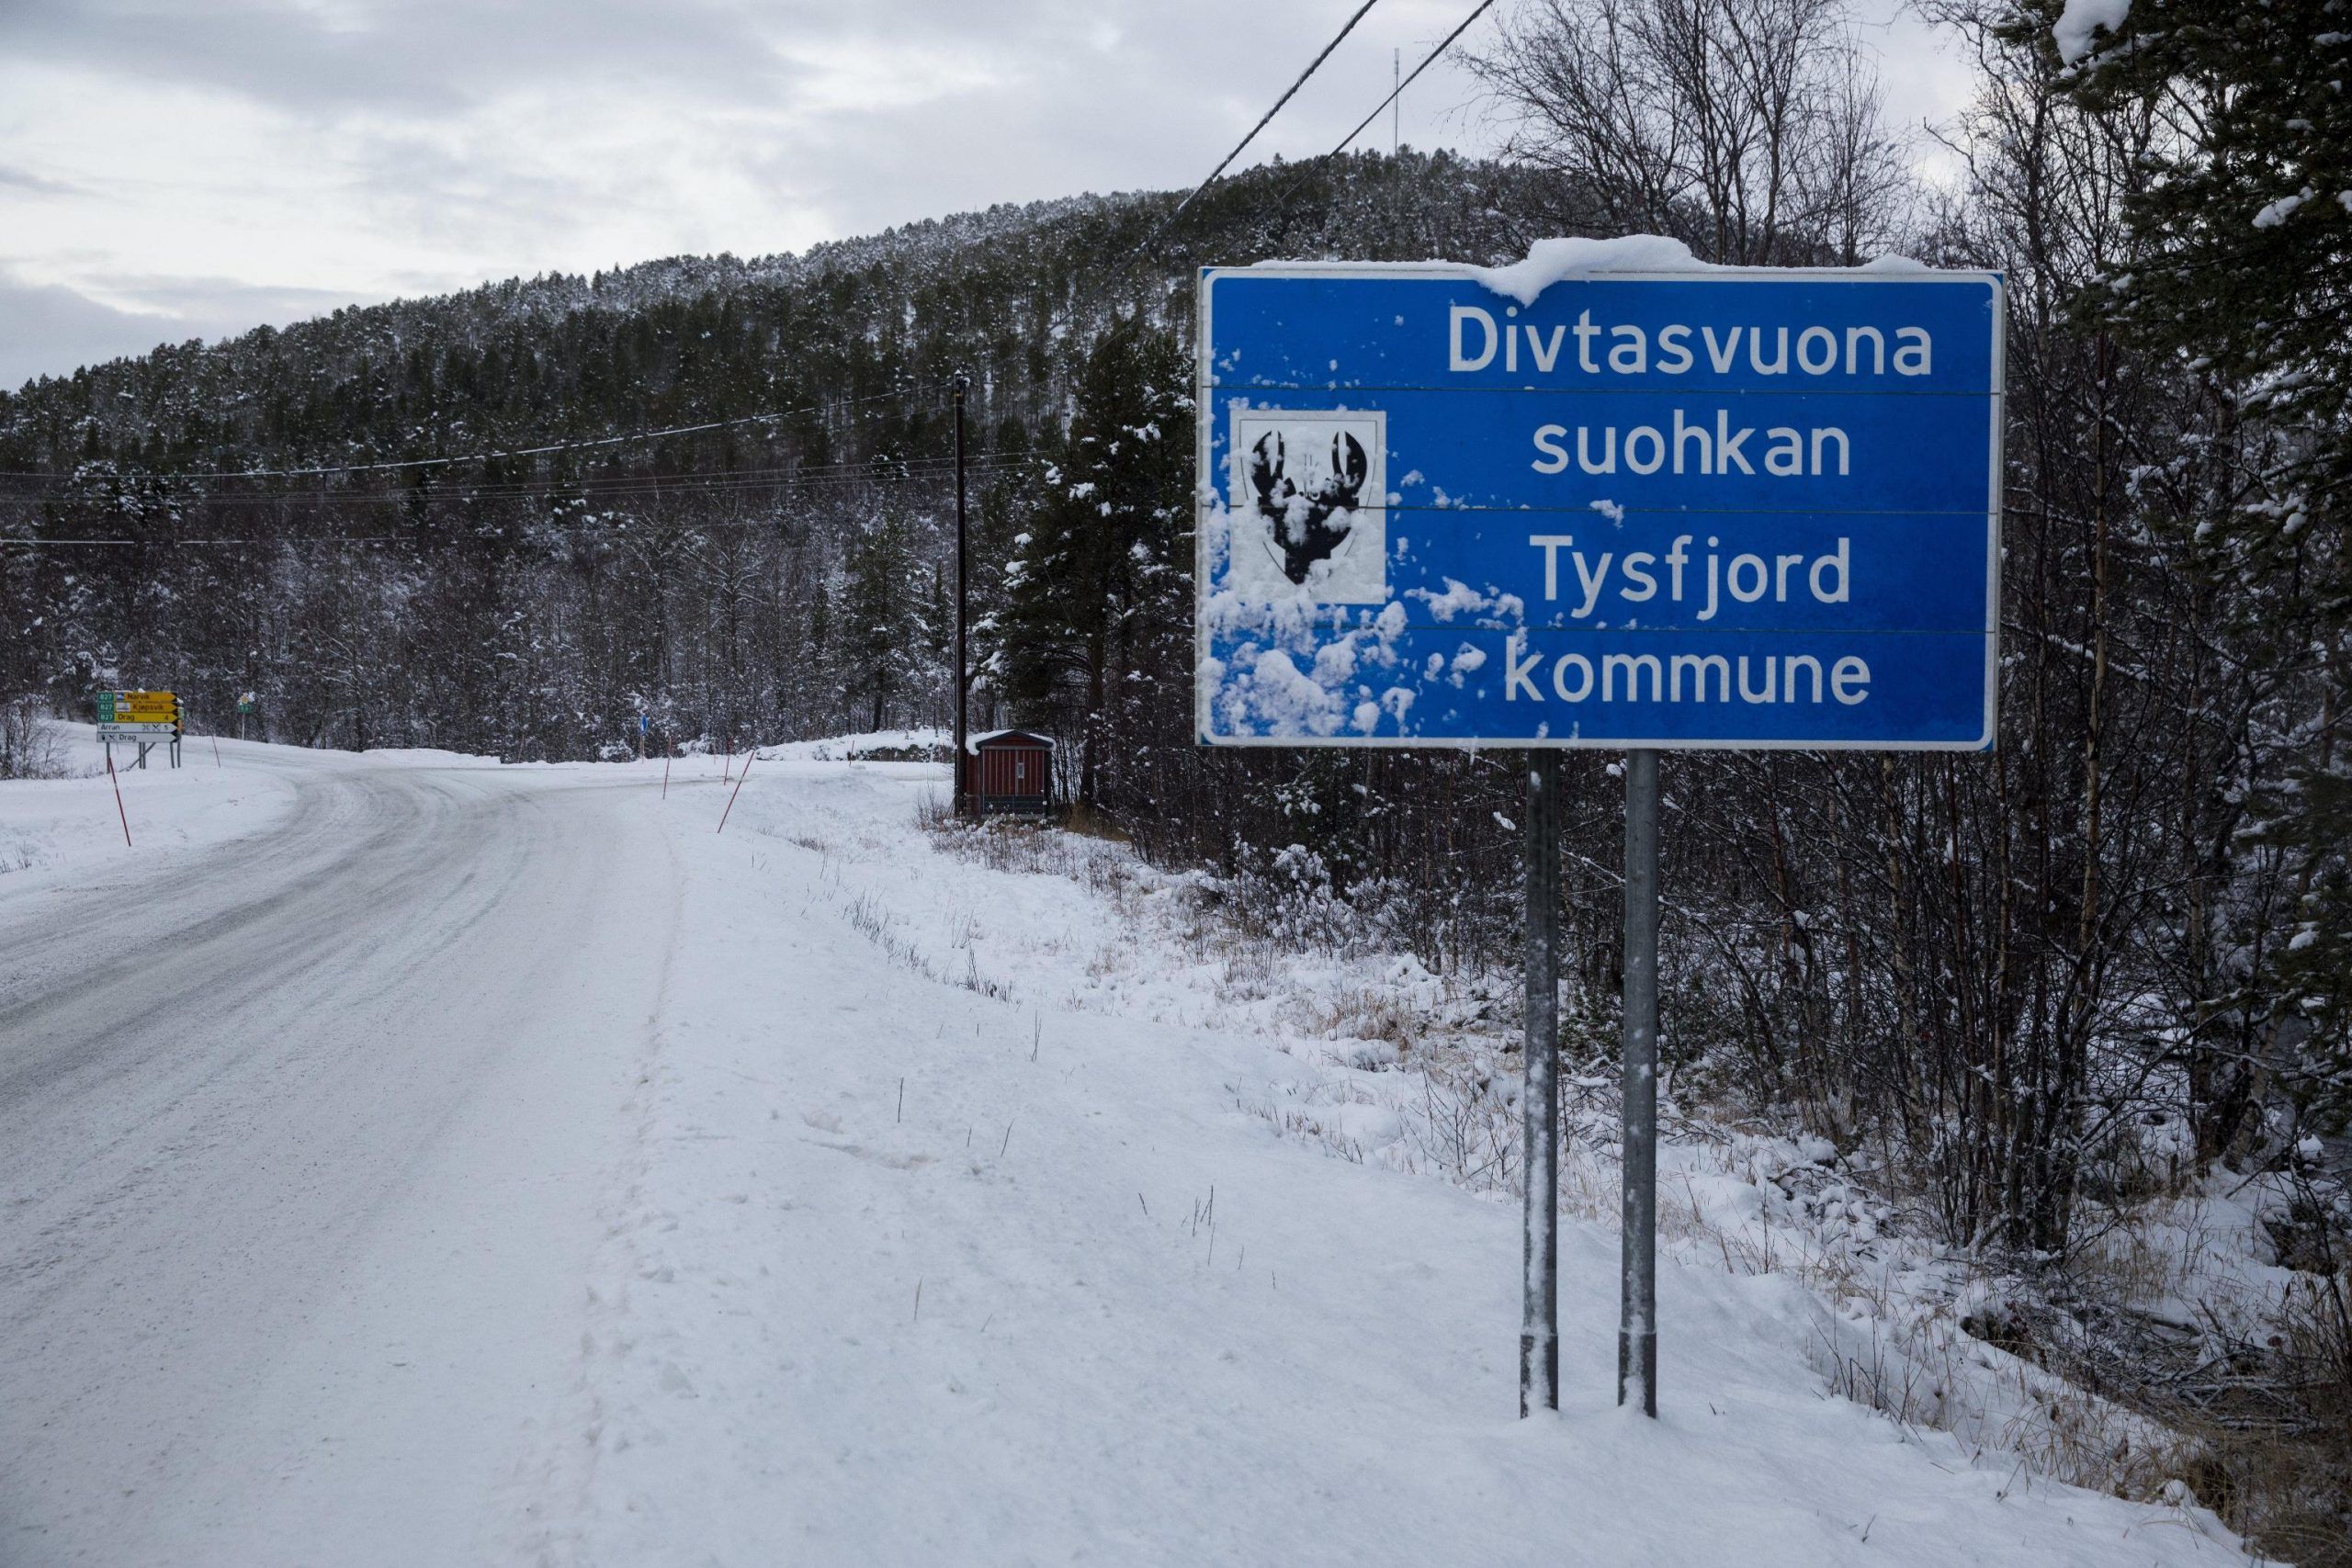 151 sexual abuse cases revealed related to Tysfjord in northern Norway